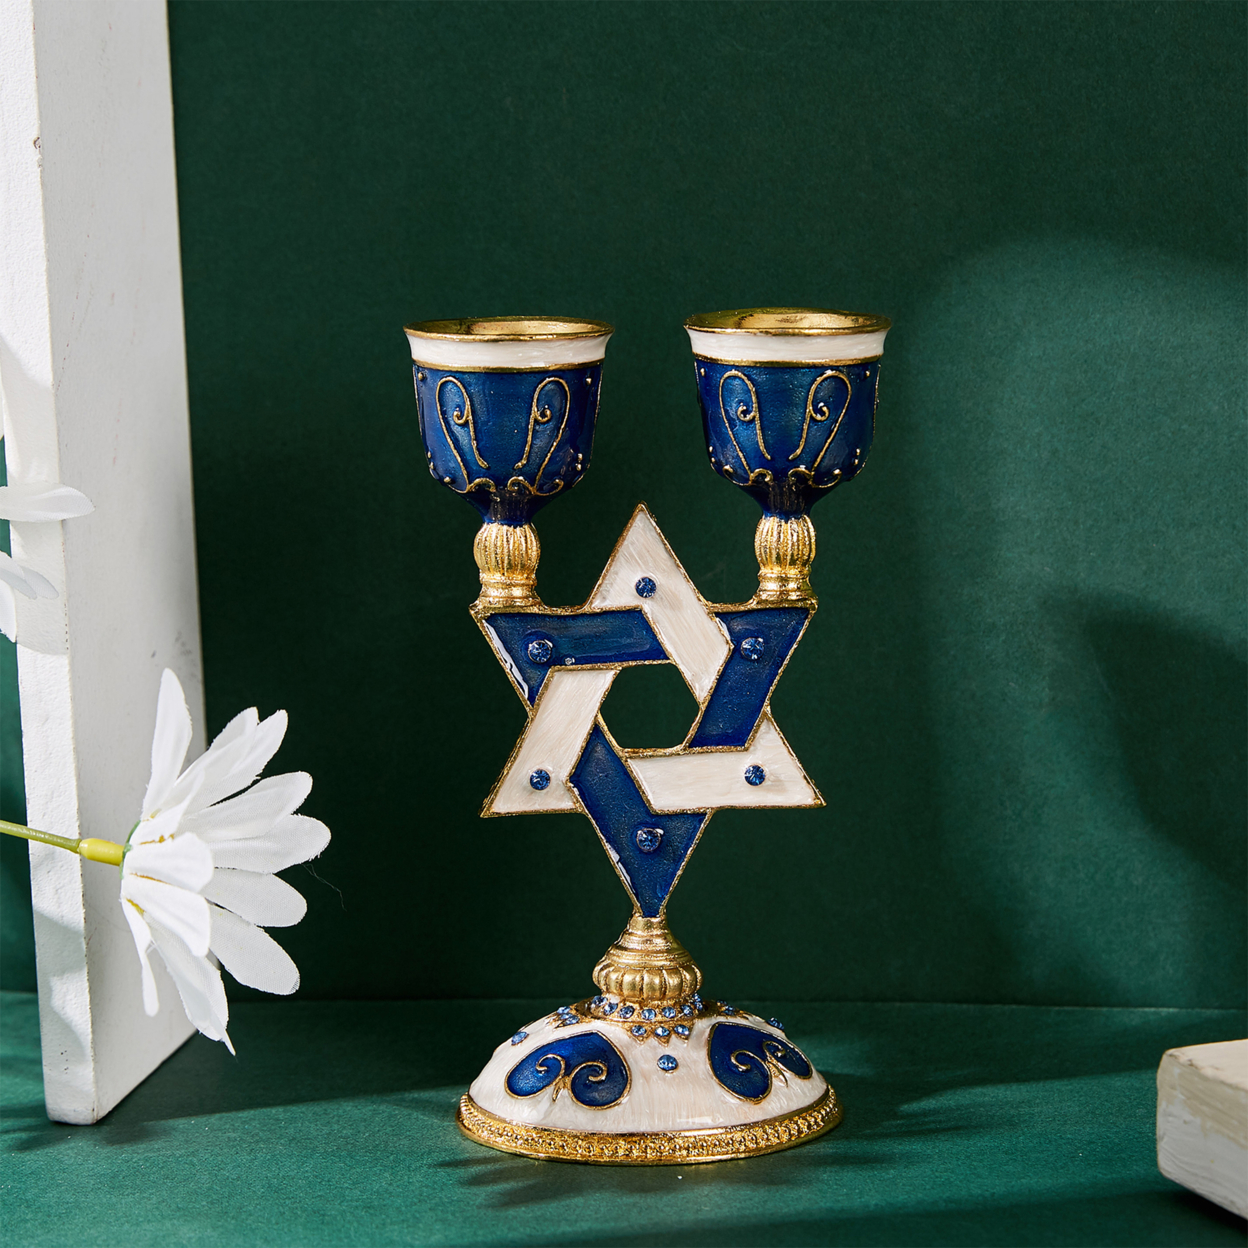 Matashi Oil Candle Holders Displays 2 Candles, Blue Intricate Details With Crystals Star Of David, Modern Home Decor Jewish Holiday Decor